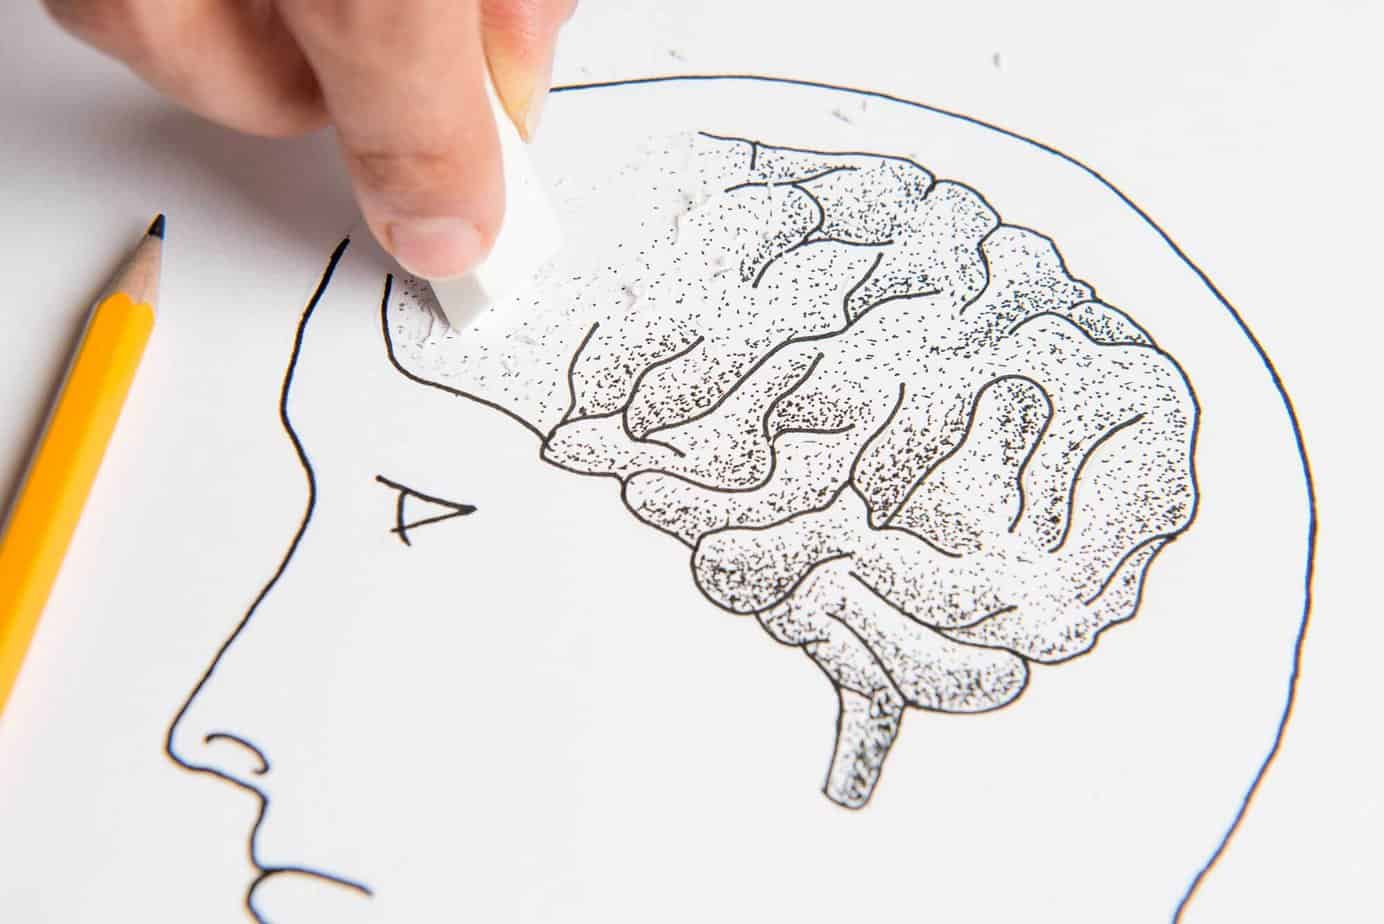 sketch of human brain with part of the brain being erased